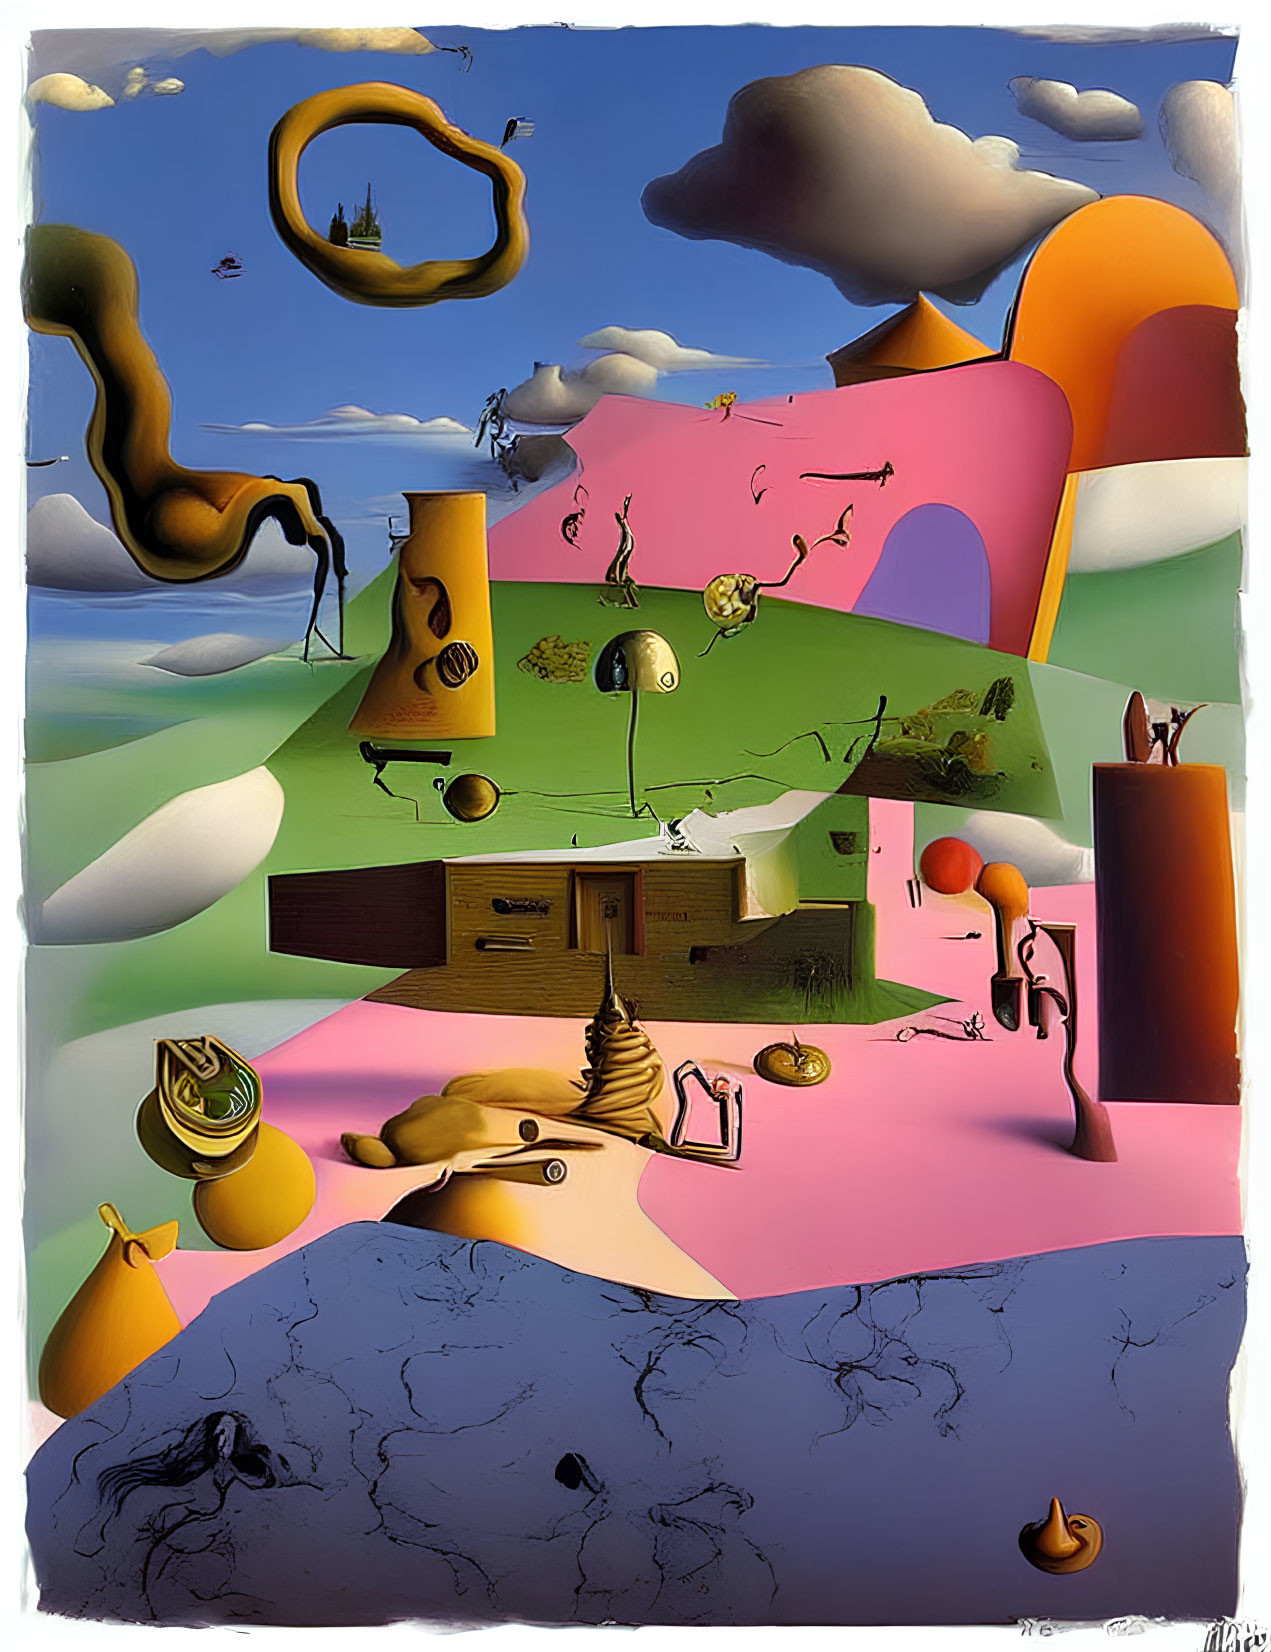 Surreal landscape with melting objects and distorted shapes